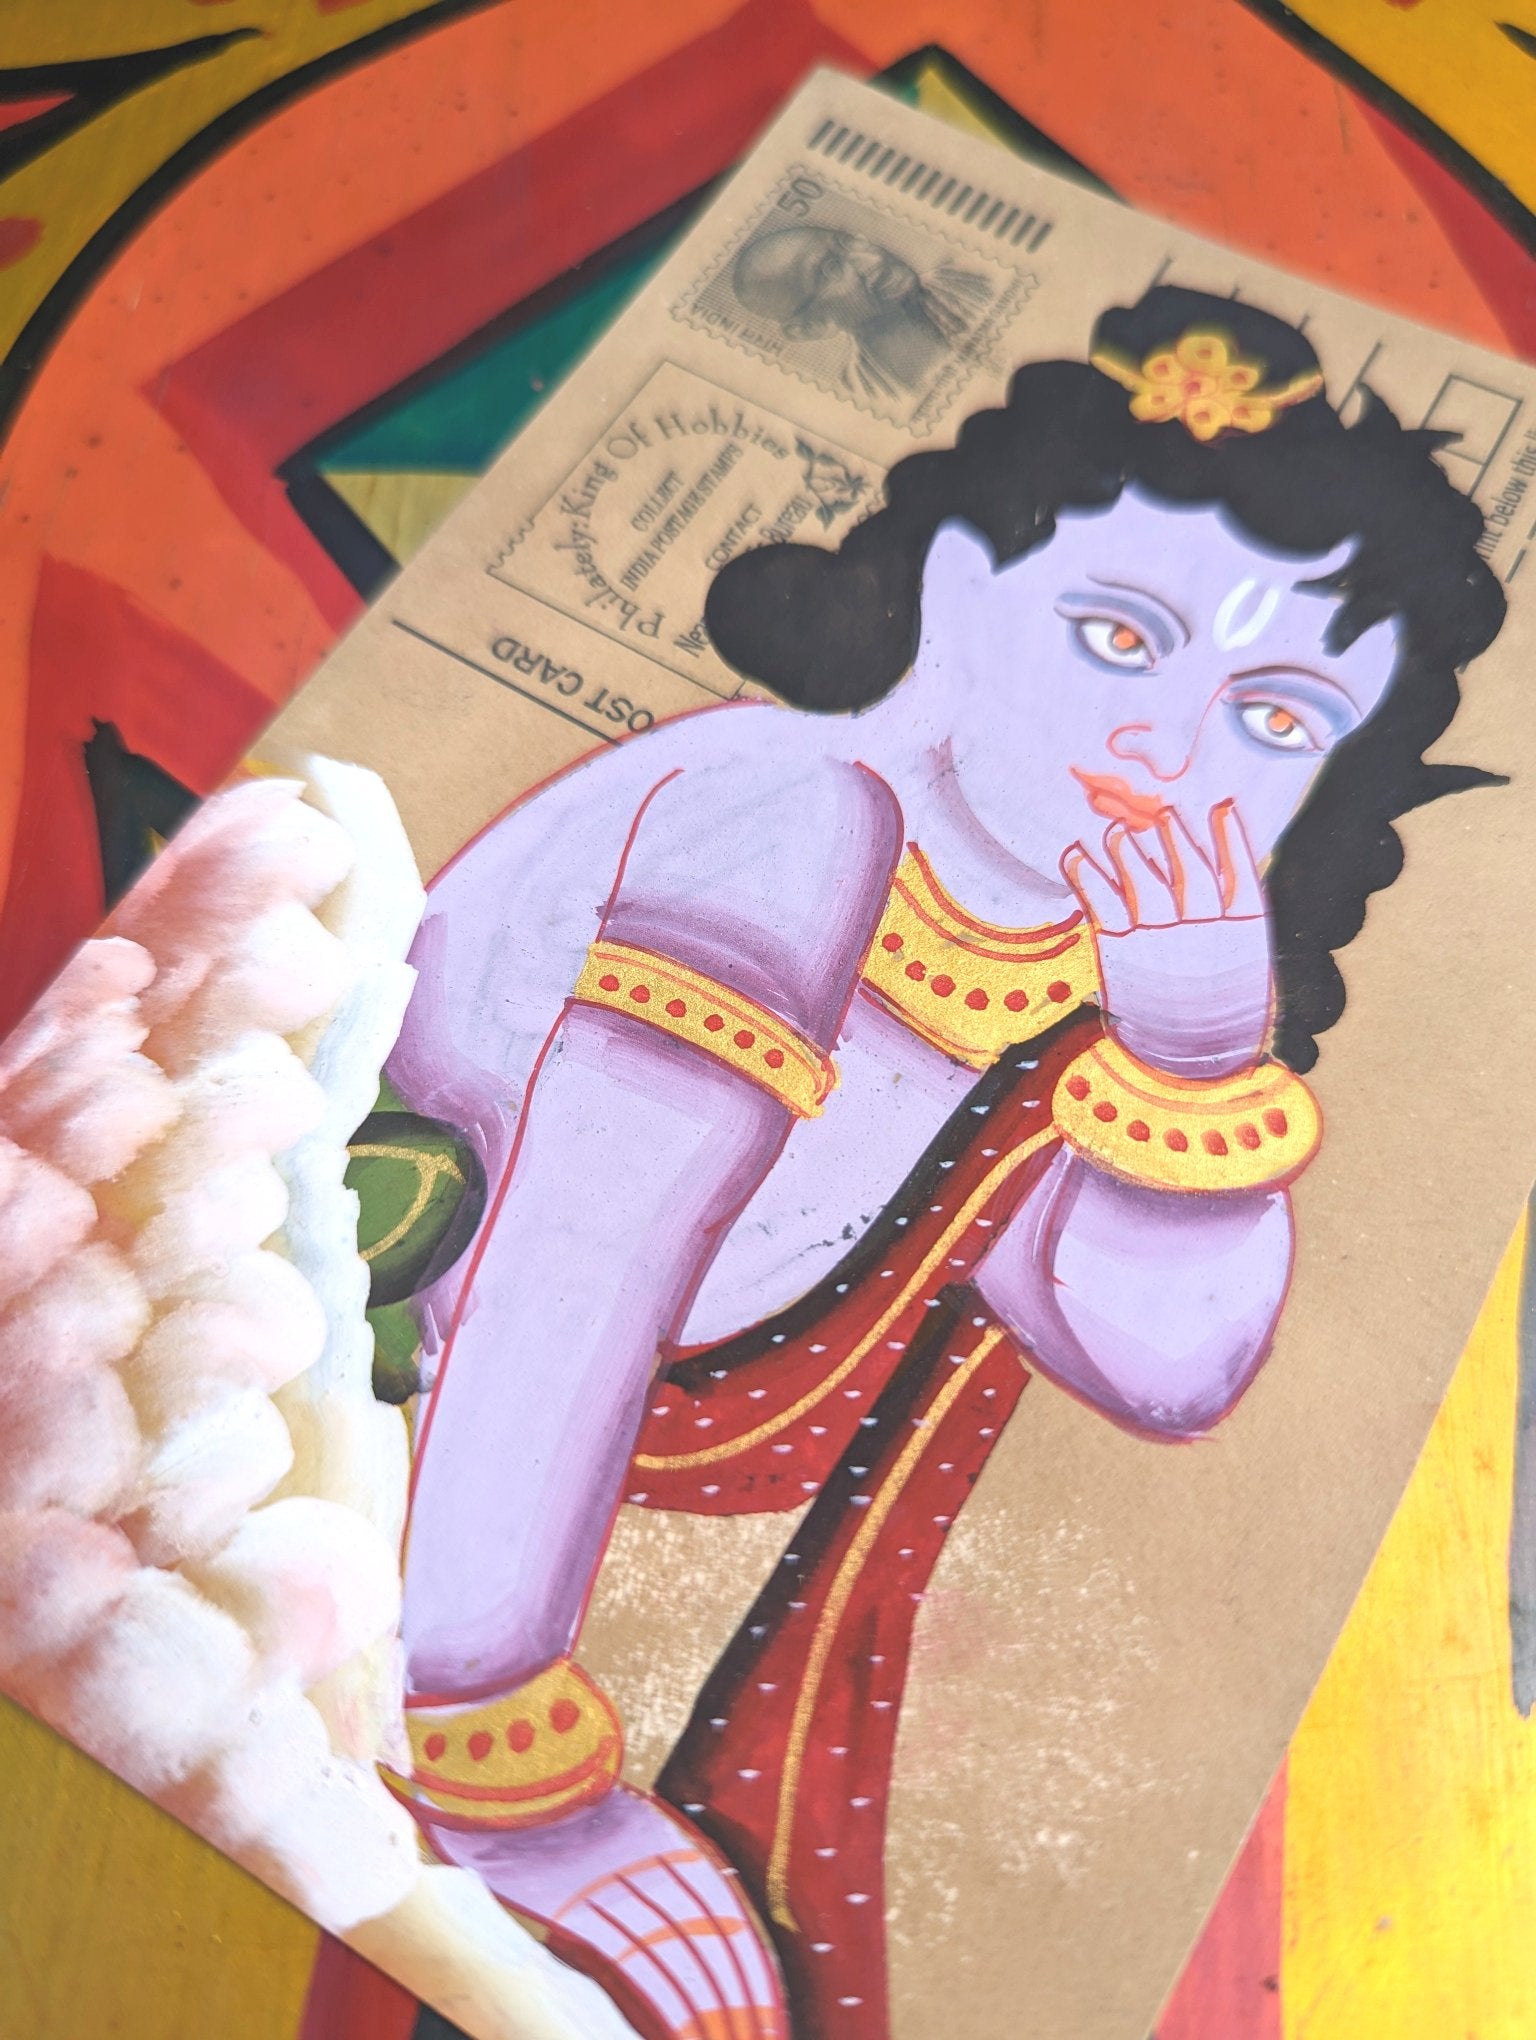 Hand painted Indian god postcards